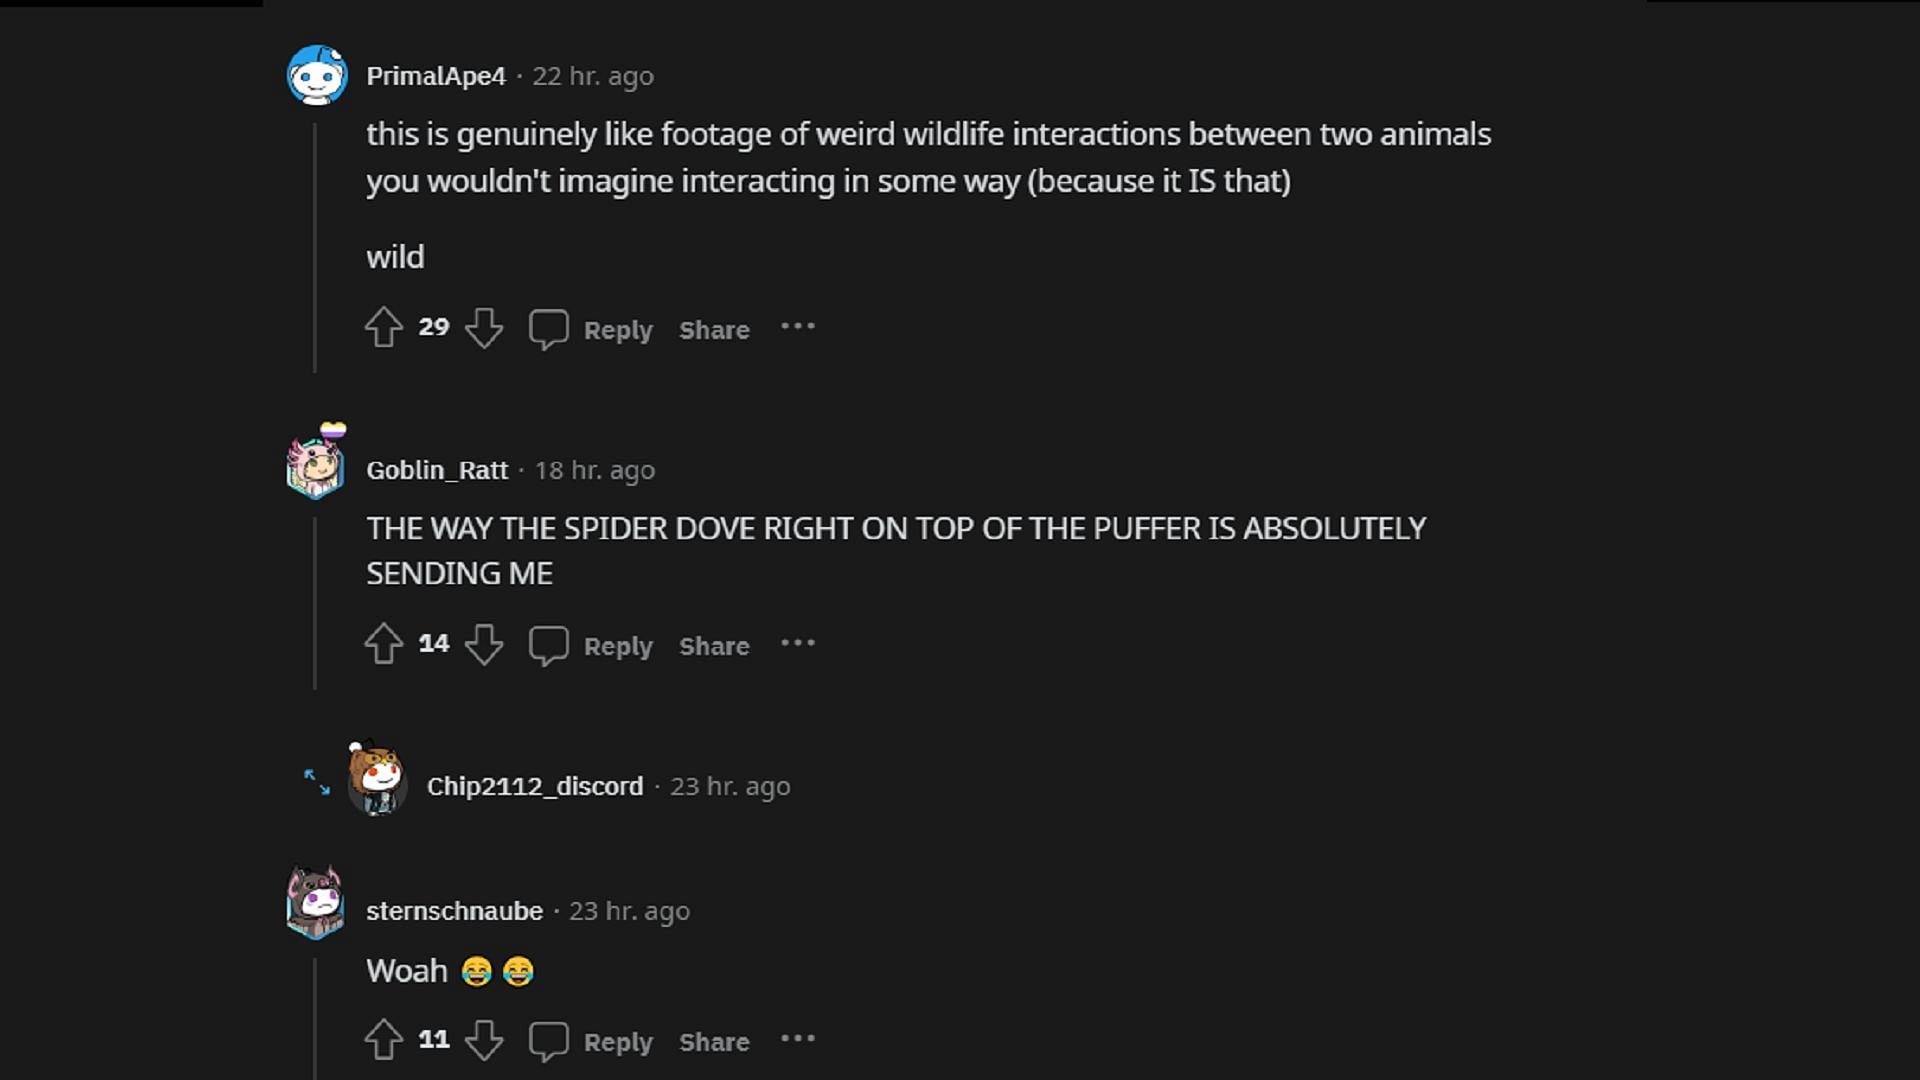 Fans are astonished by how quickly and aggressively the spider beat the pufferfish (Image via Reddit)